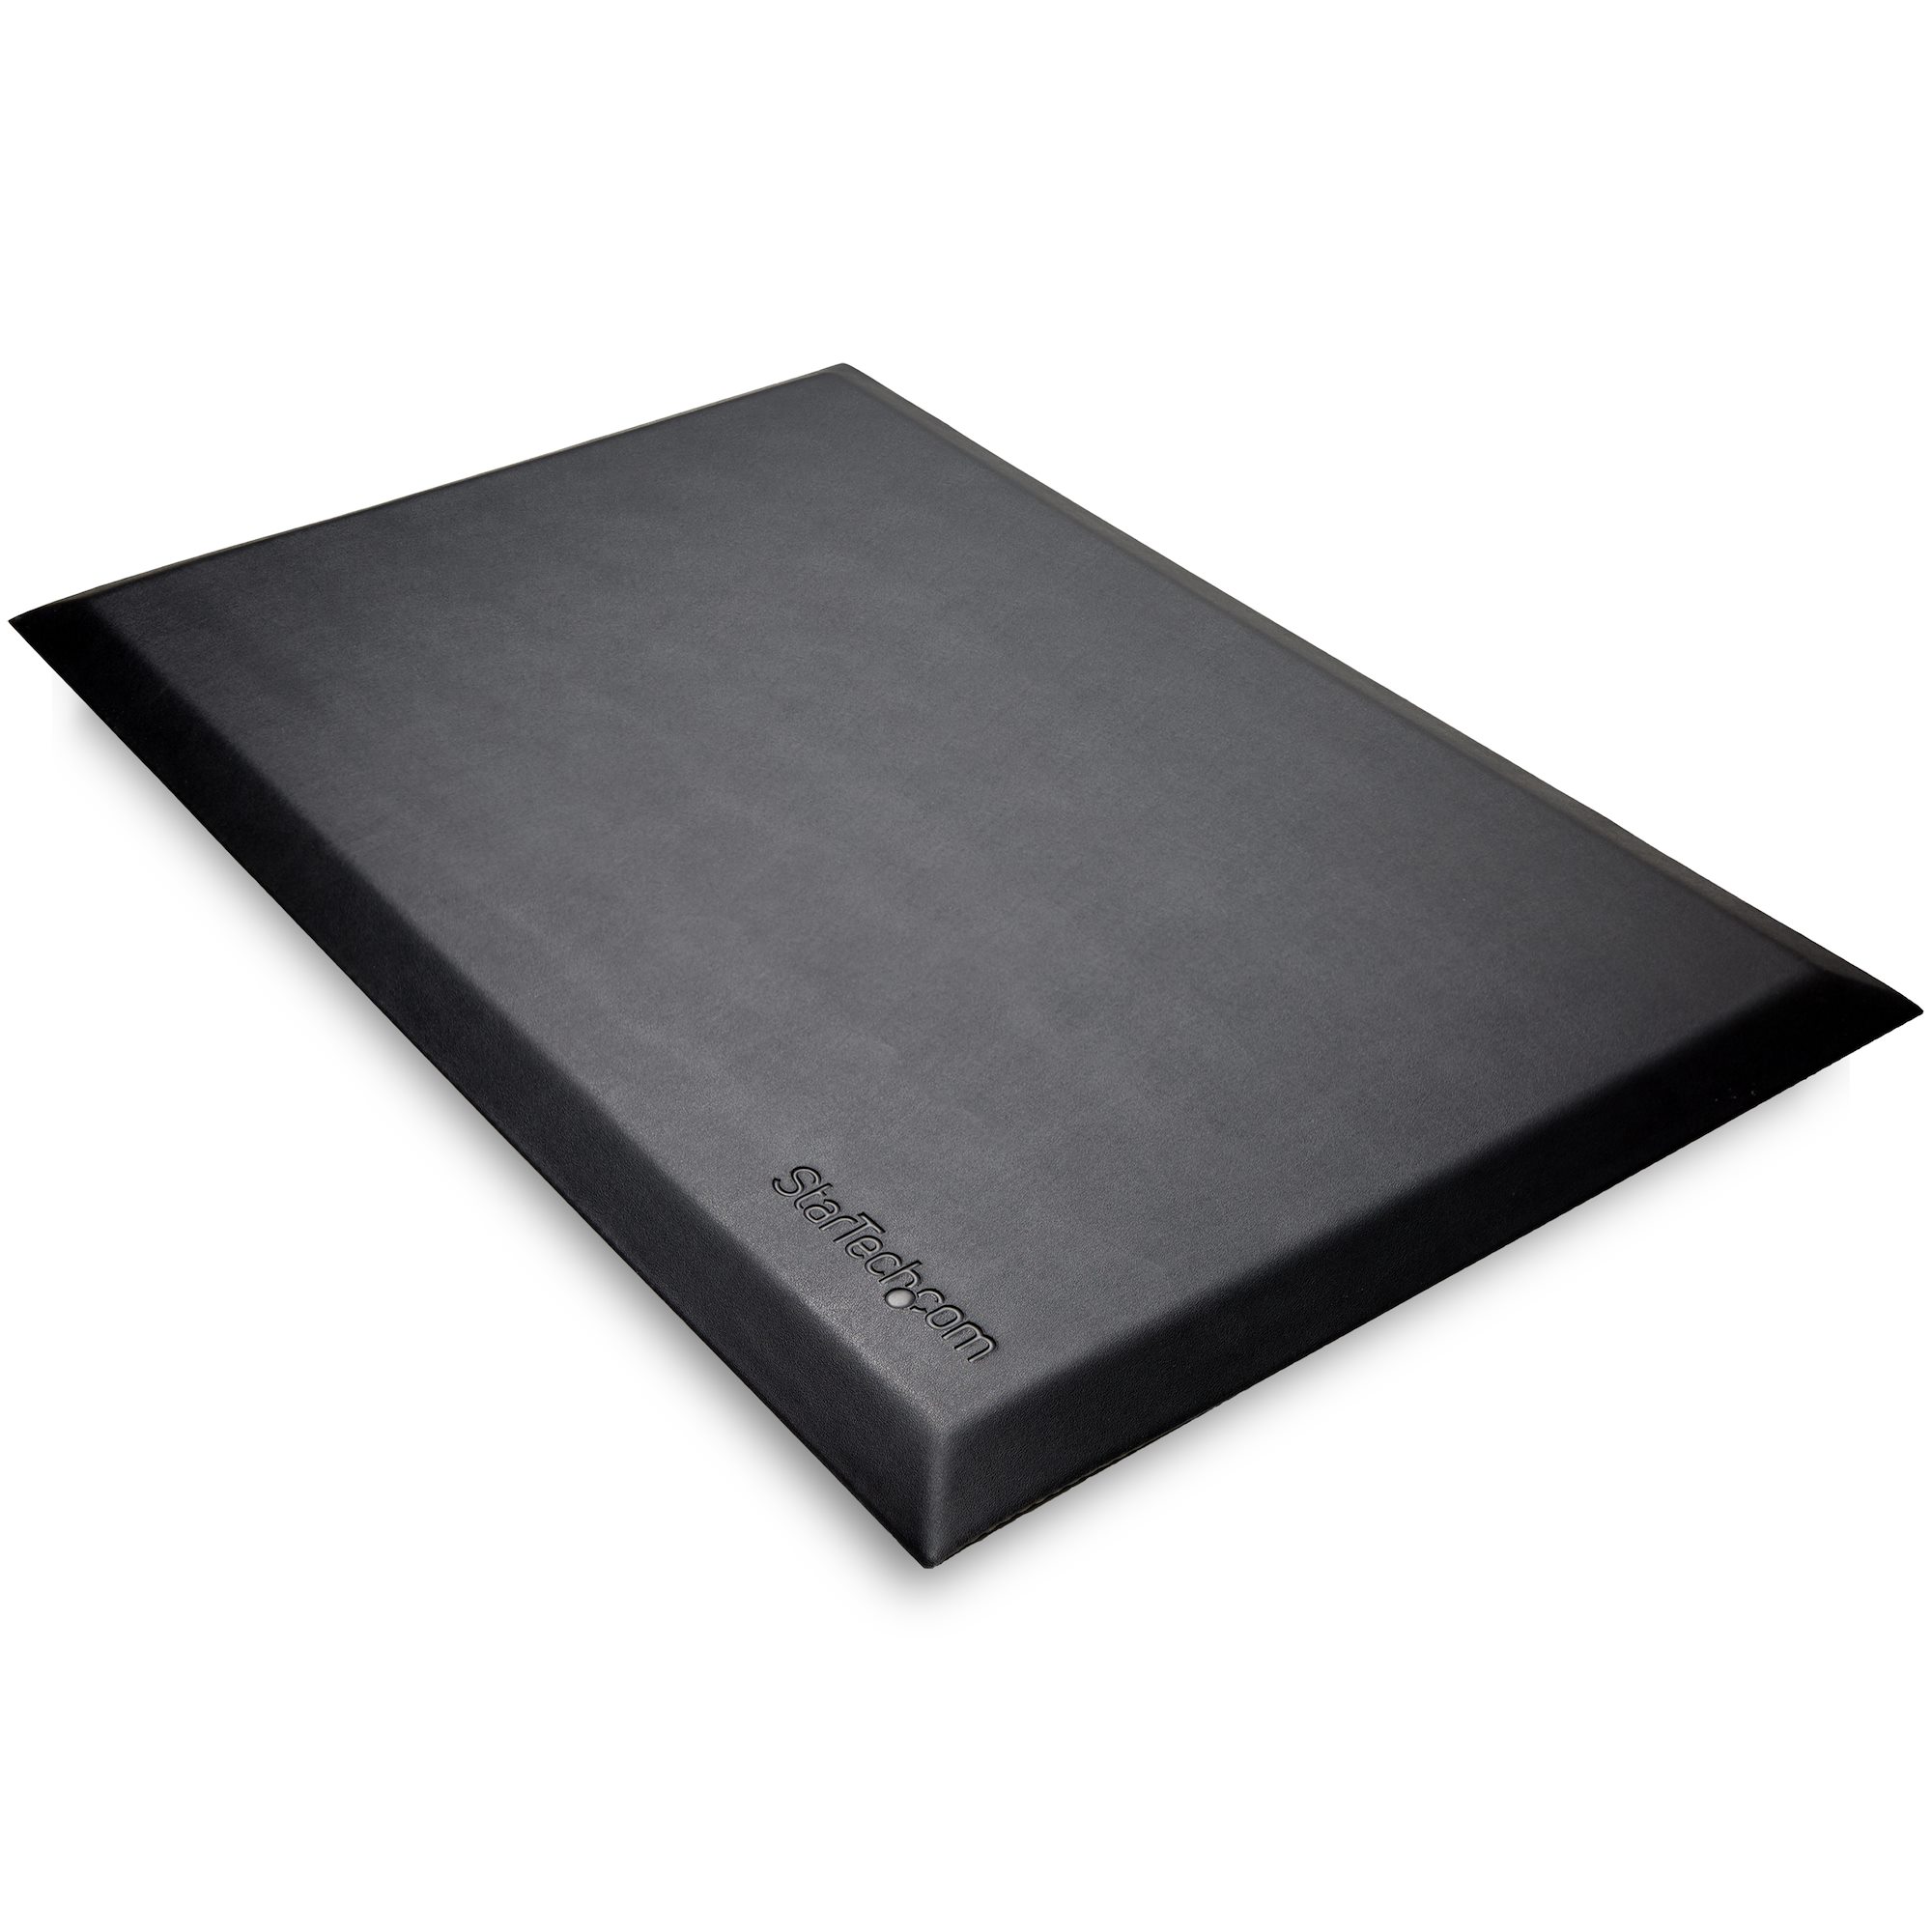 Large Anti-Fatigue Mat for Standing Desk - Sit-Stand Workstations